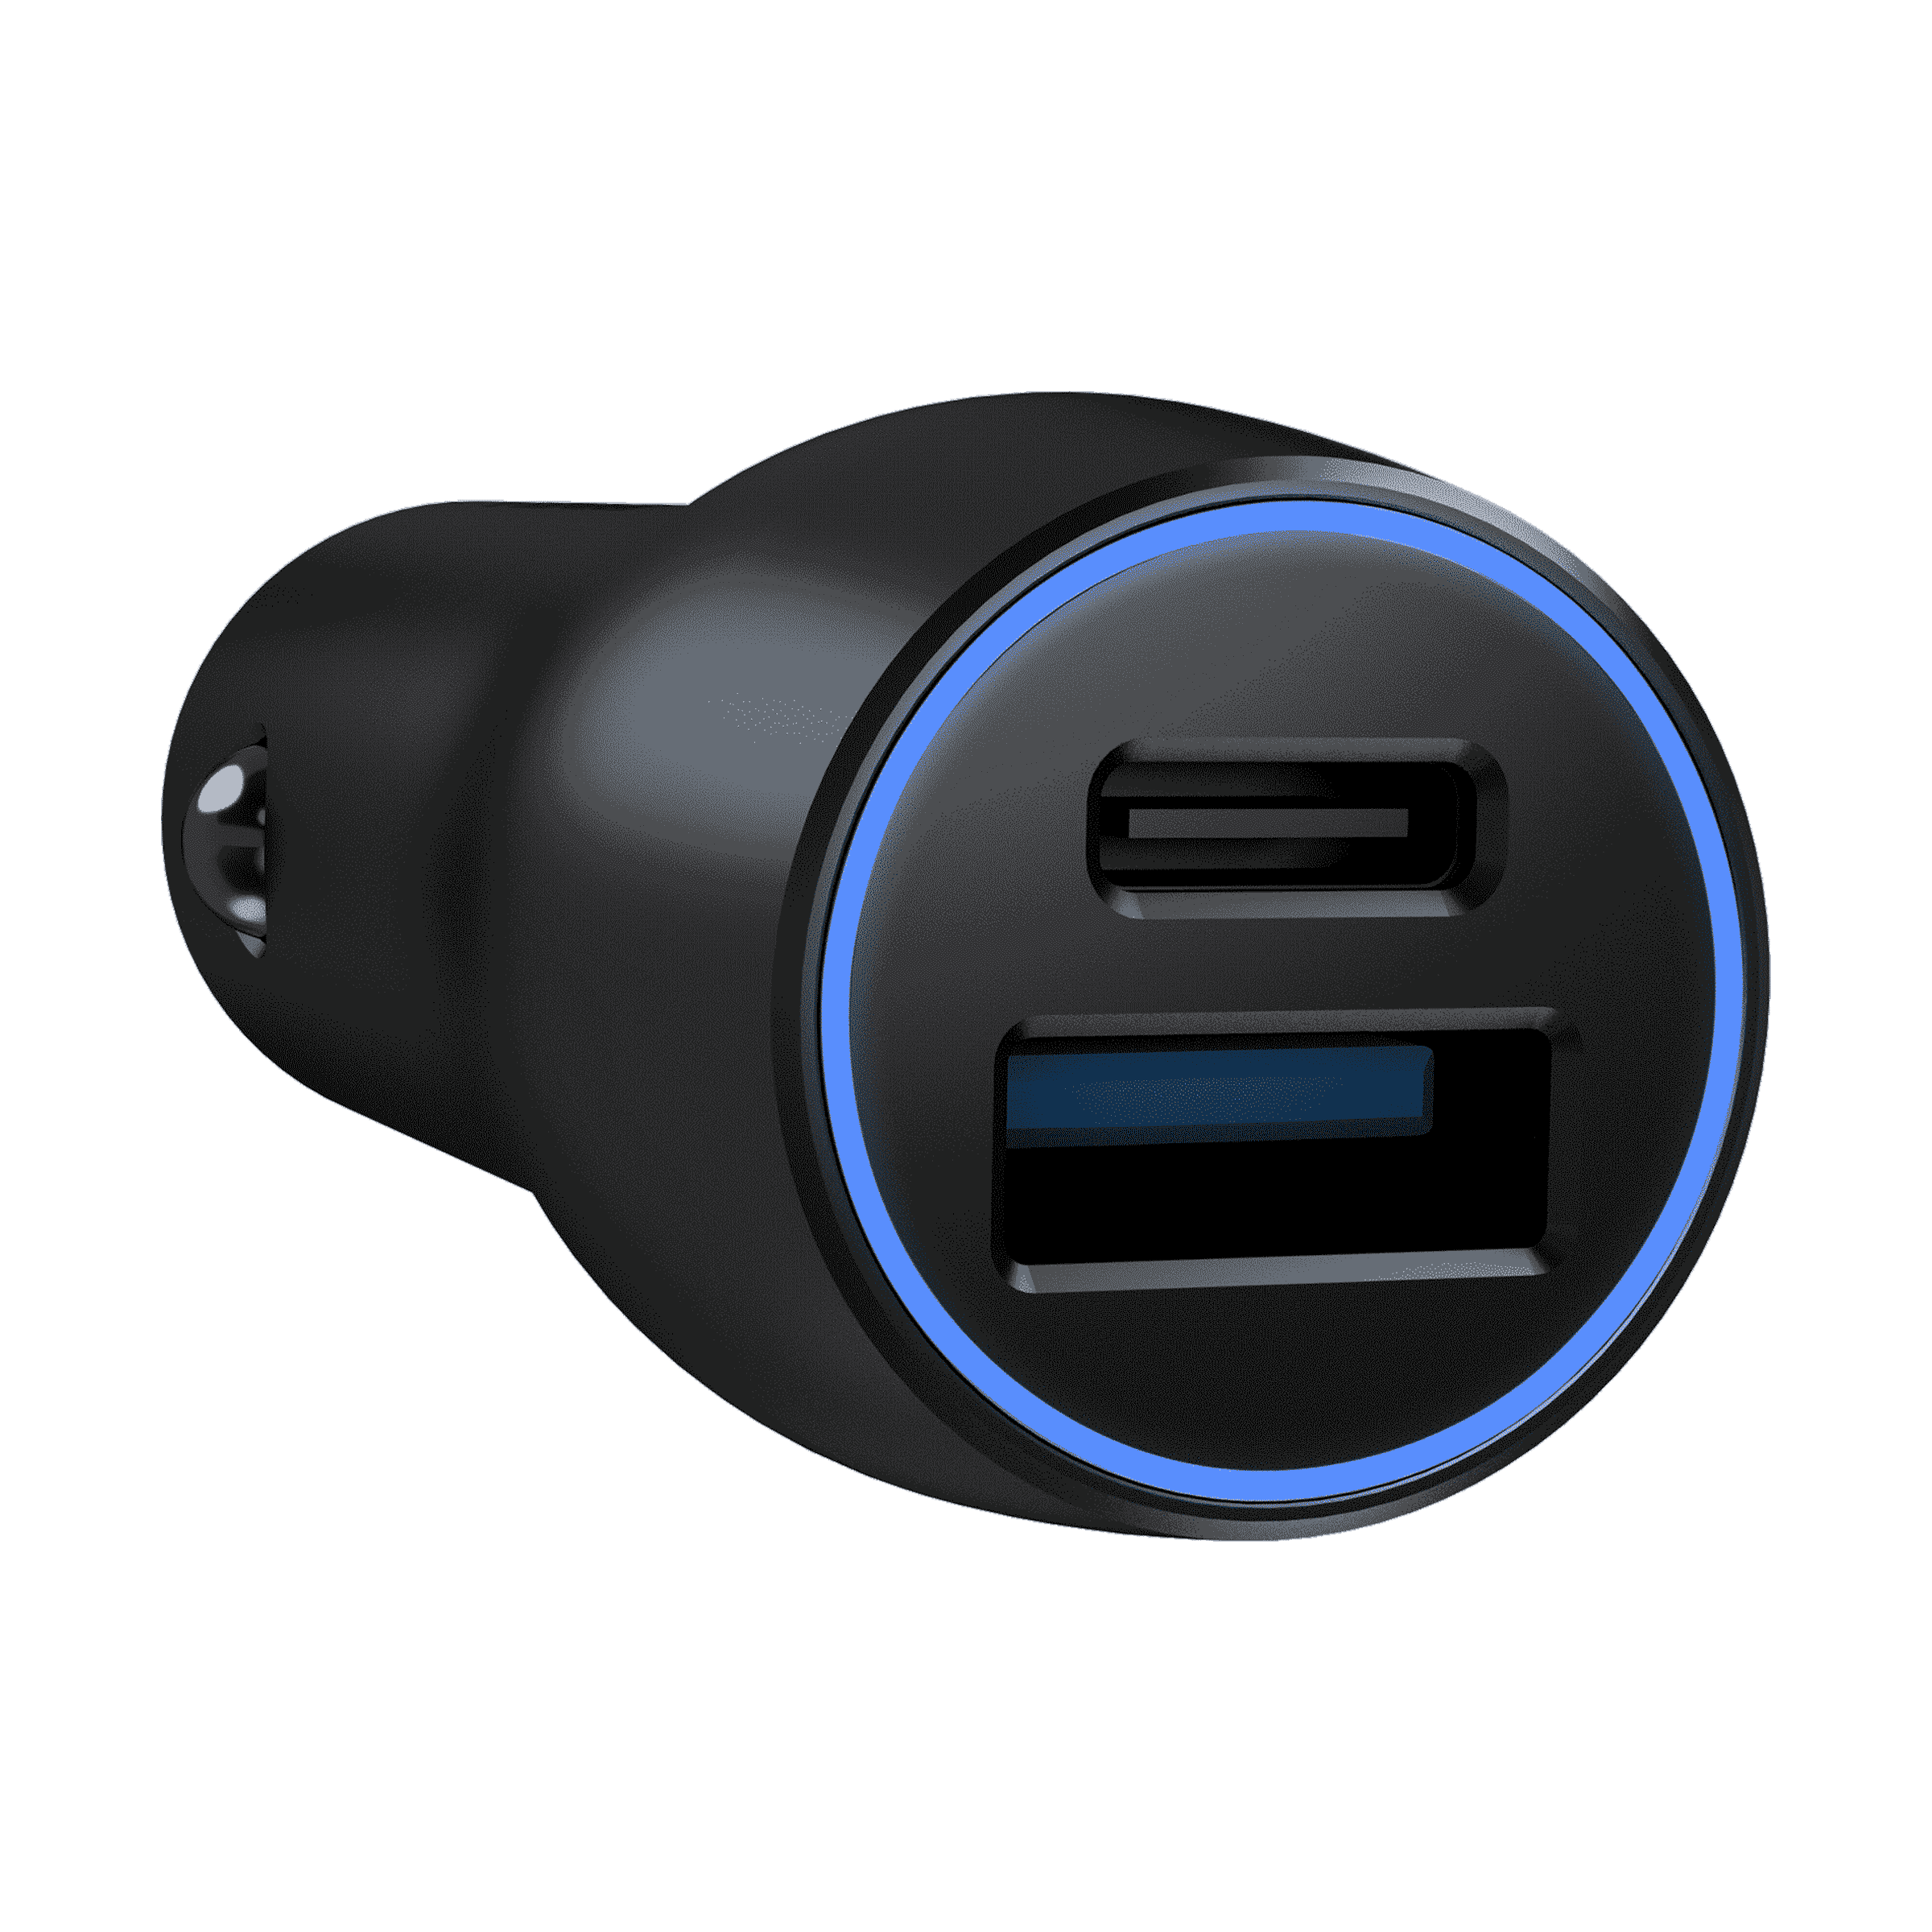 ASUS Charger USB-C｜Adapters and Chargers｜ASUS USA